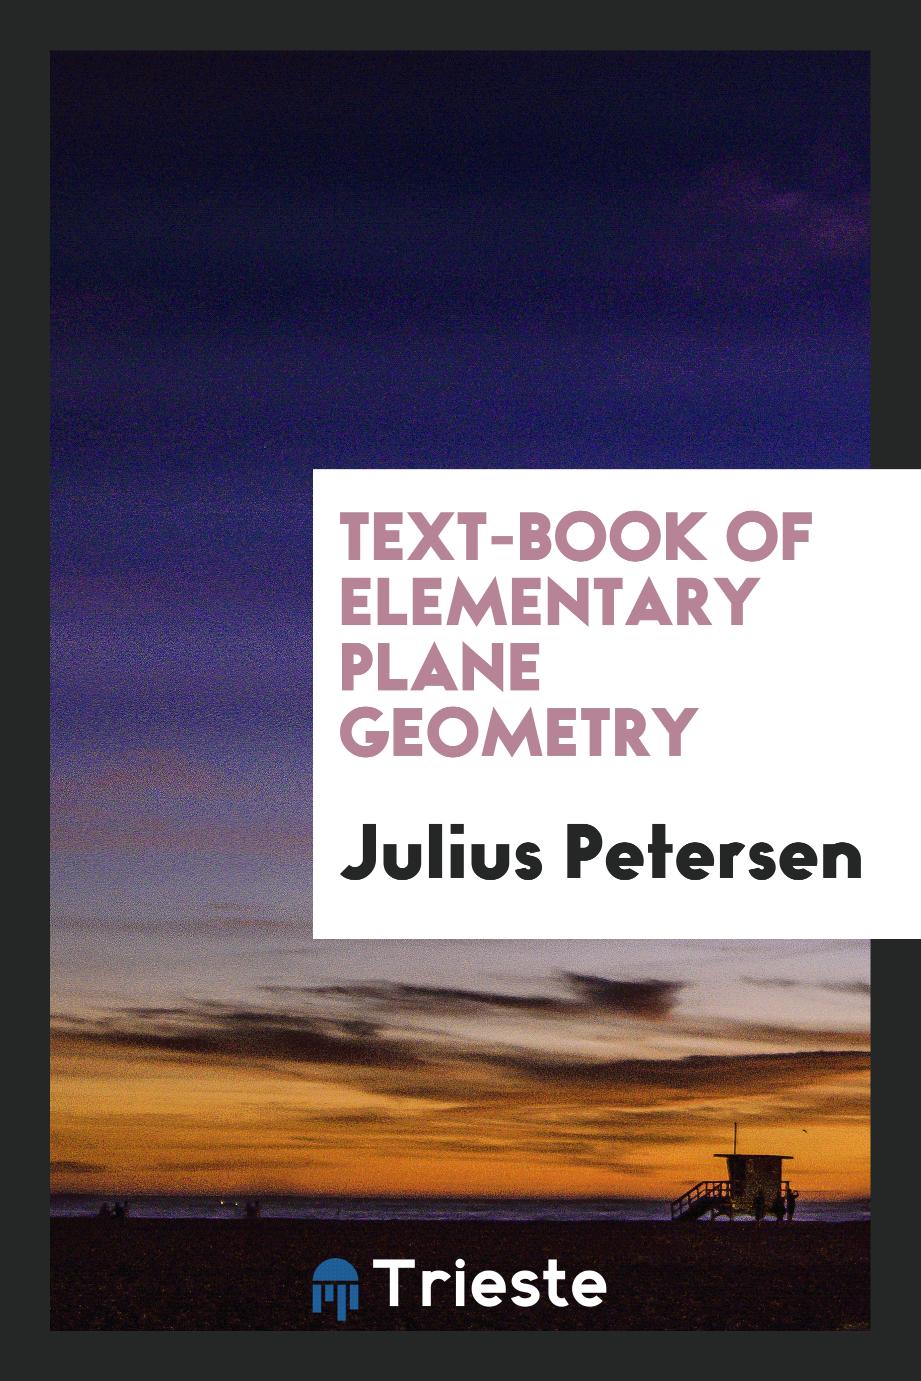 Text-book of elementary plane geometry